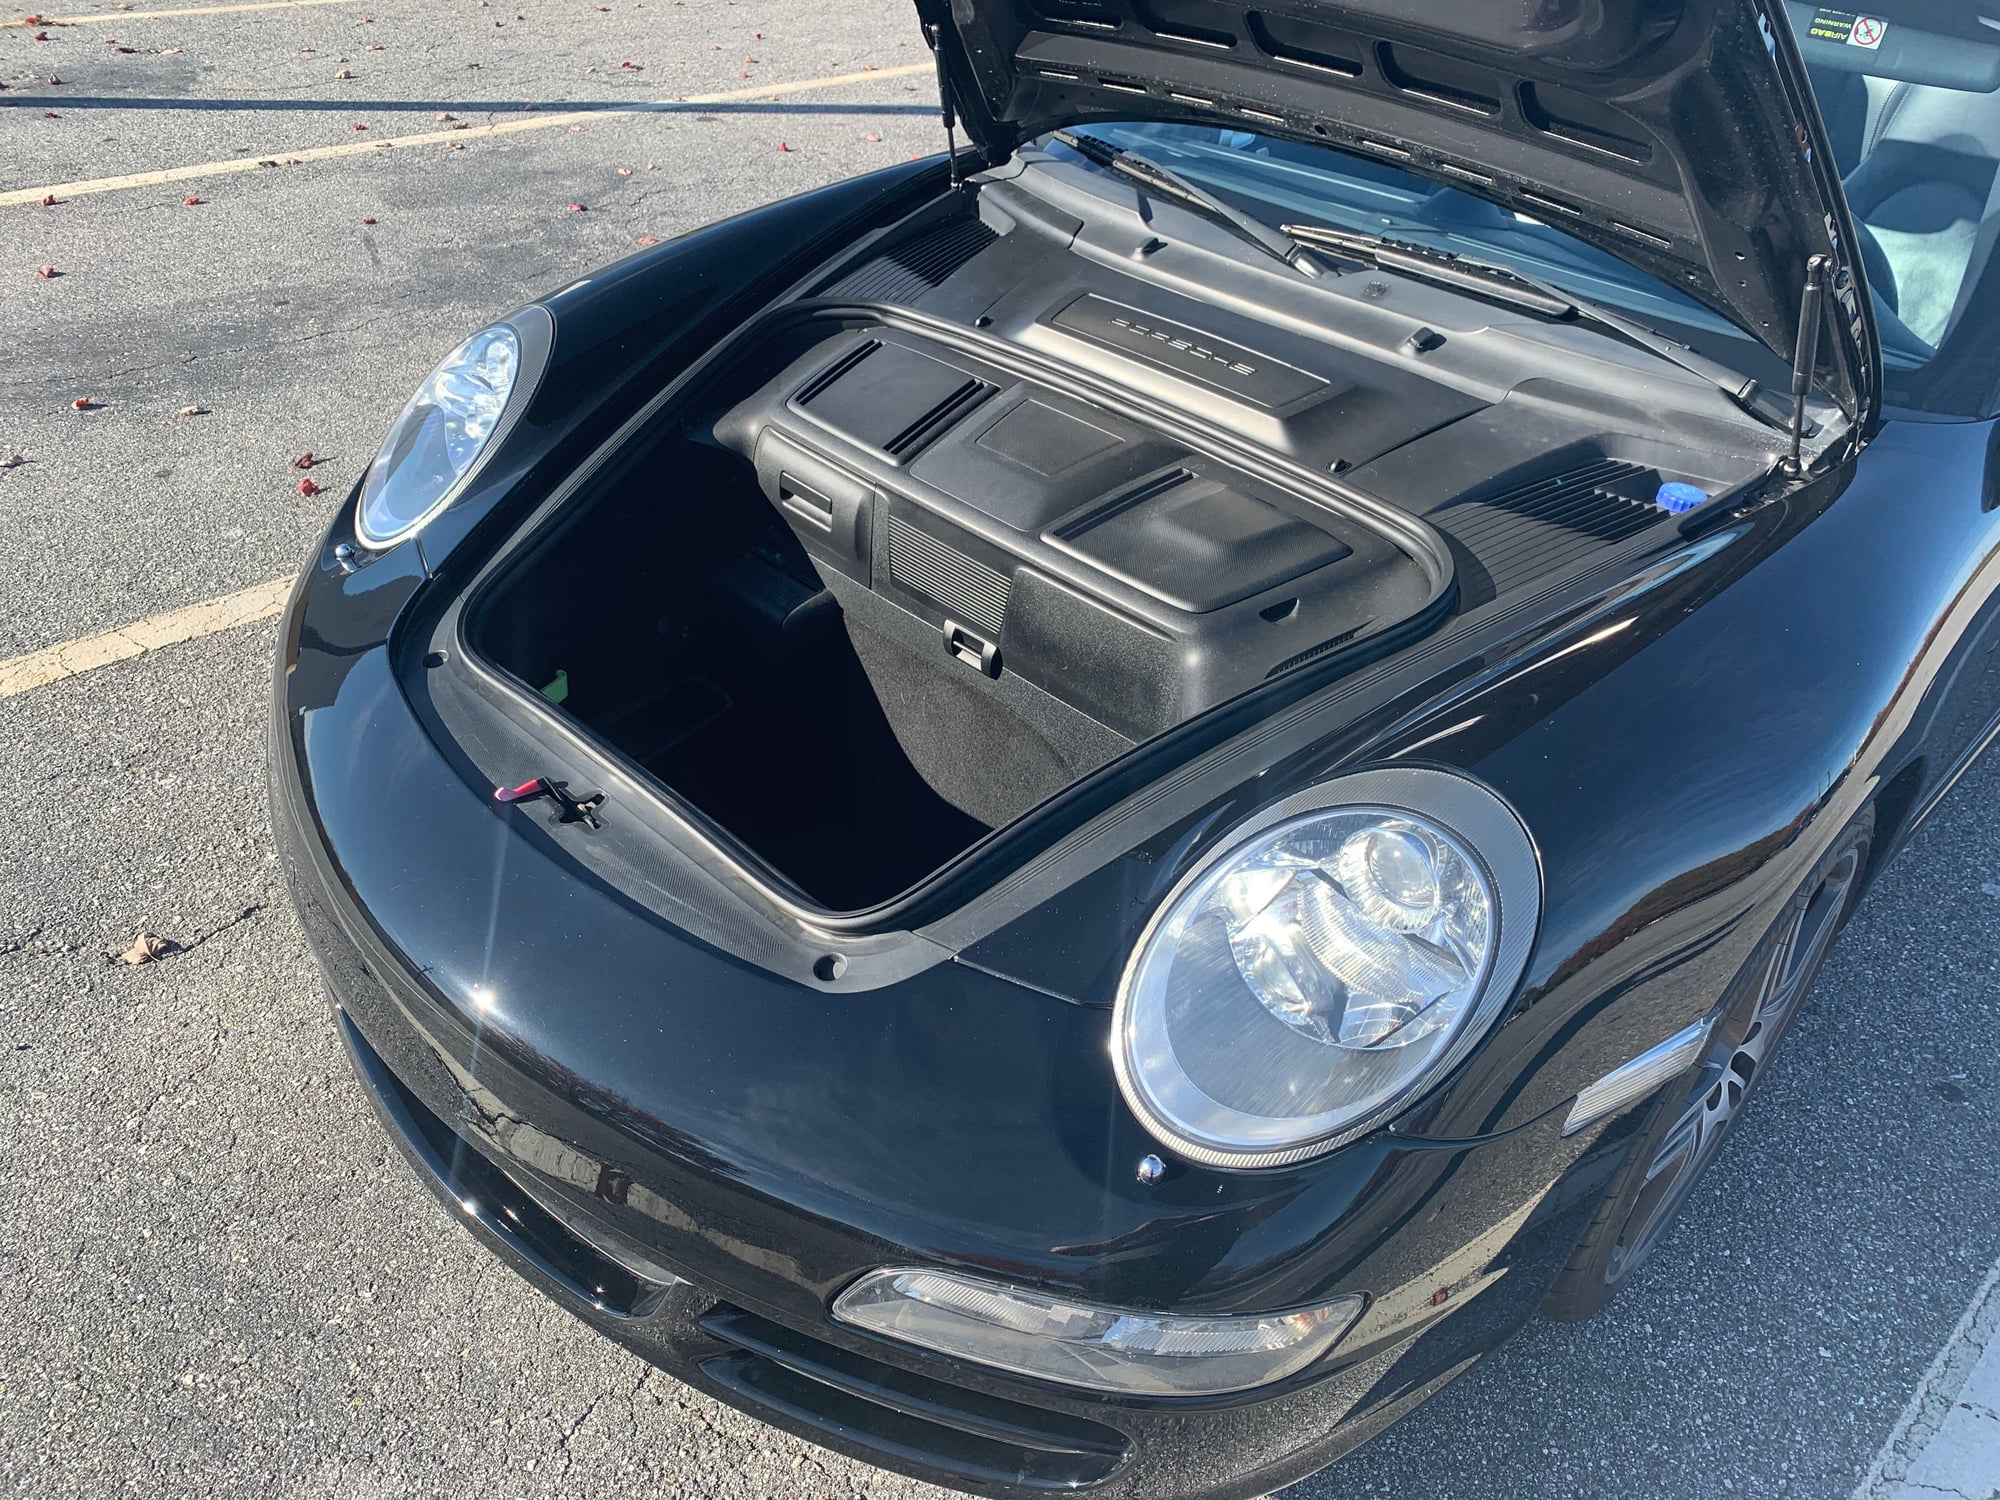 2006 Porsche 911 - 2006 Carrera 4S Cabriolet Manual 4.0 - Used - VIN WP0CB29966S766199 - 52,500 Miles - 6 cyl - AWD - Manual - Convertible - Black - Asheville, NC 28759, United States